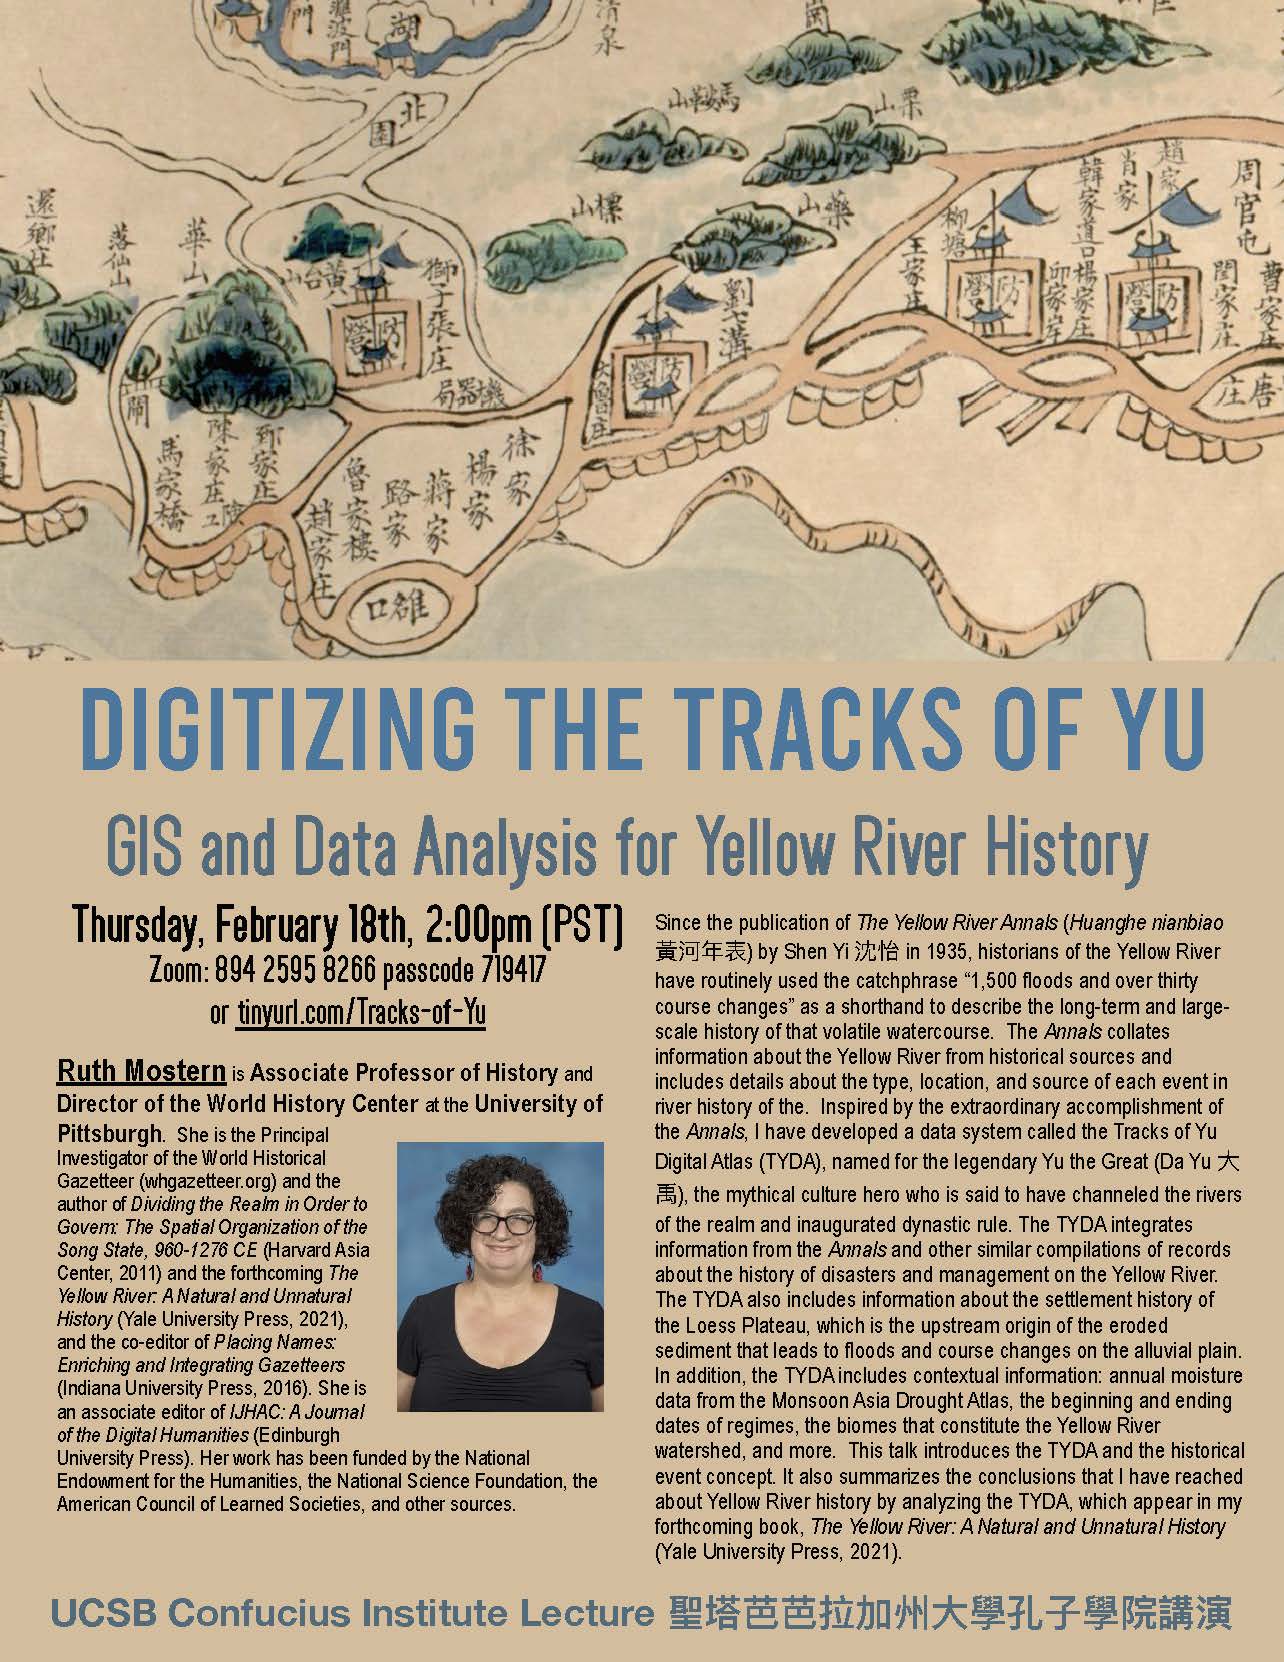 Poster for lecture, "Digitizing the Tracks of Yu" by Dr. Ruth Mostern